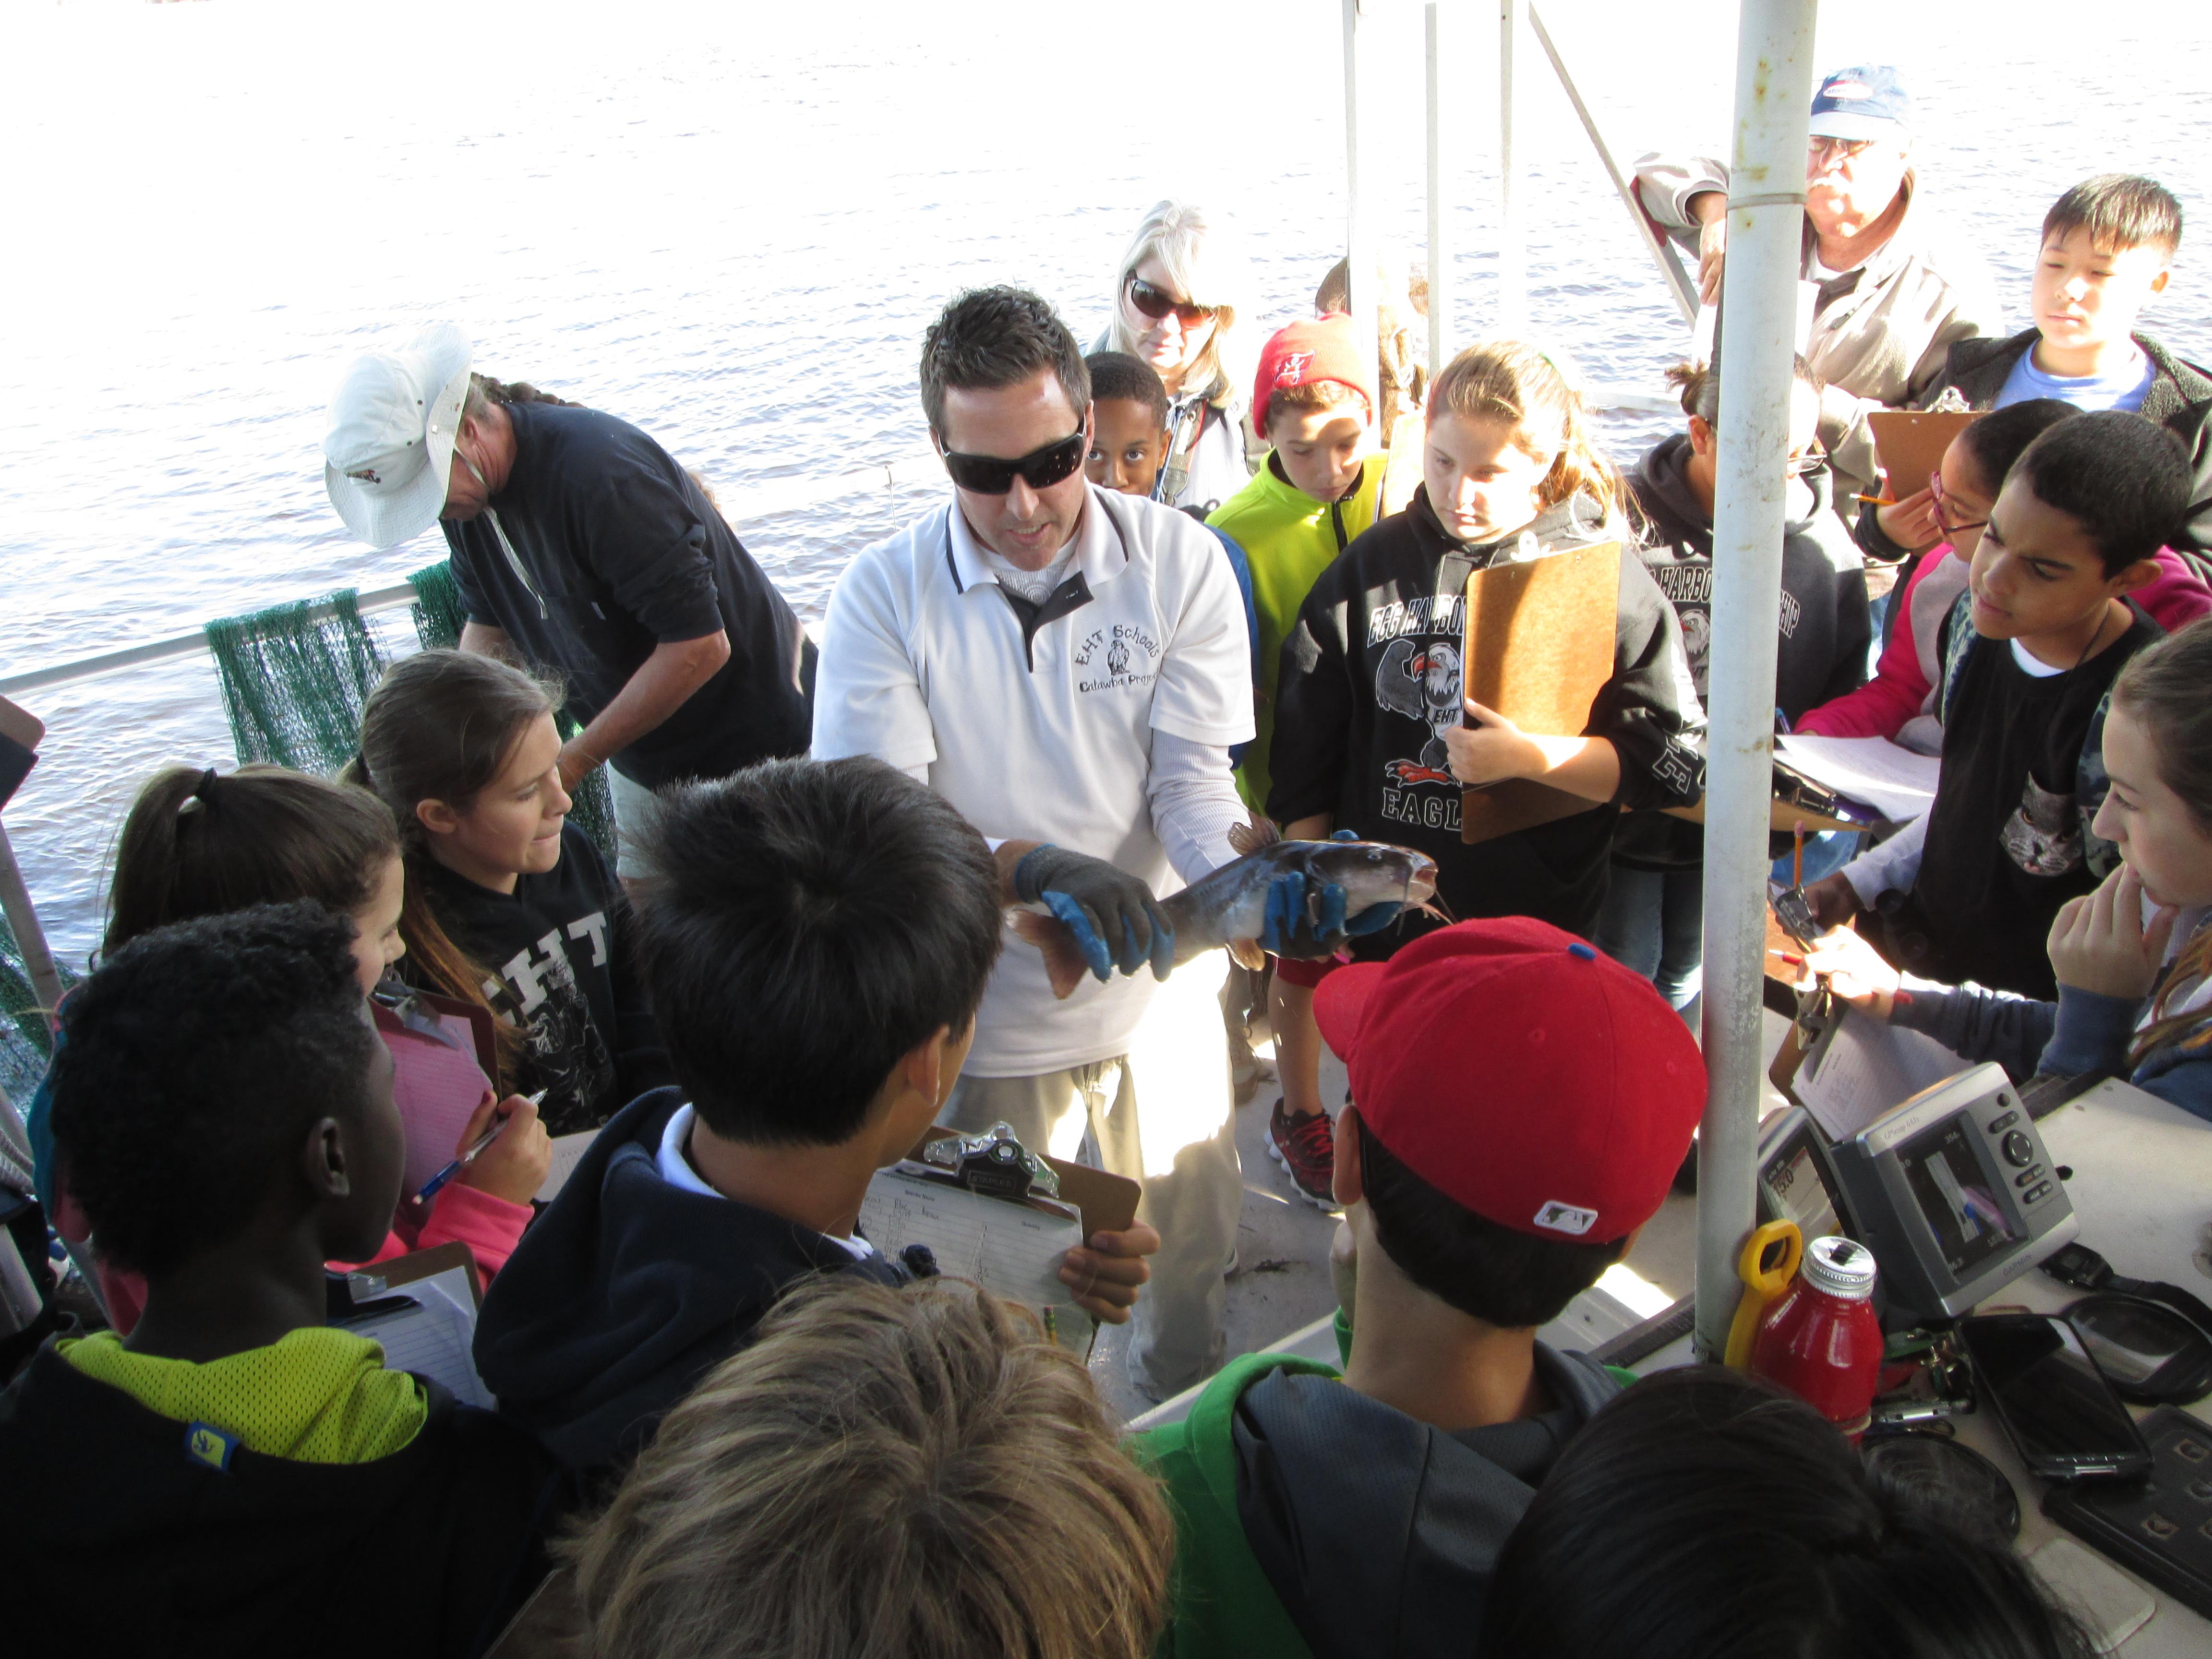 School group examines a fish held by the instructor.